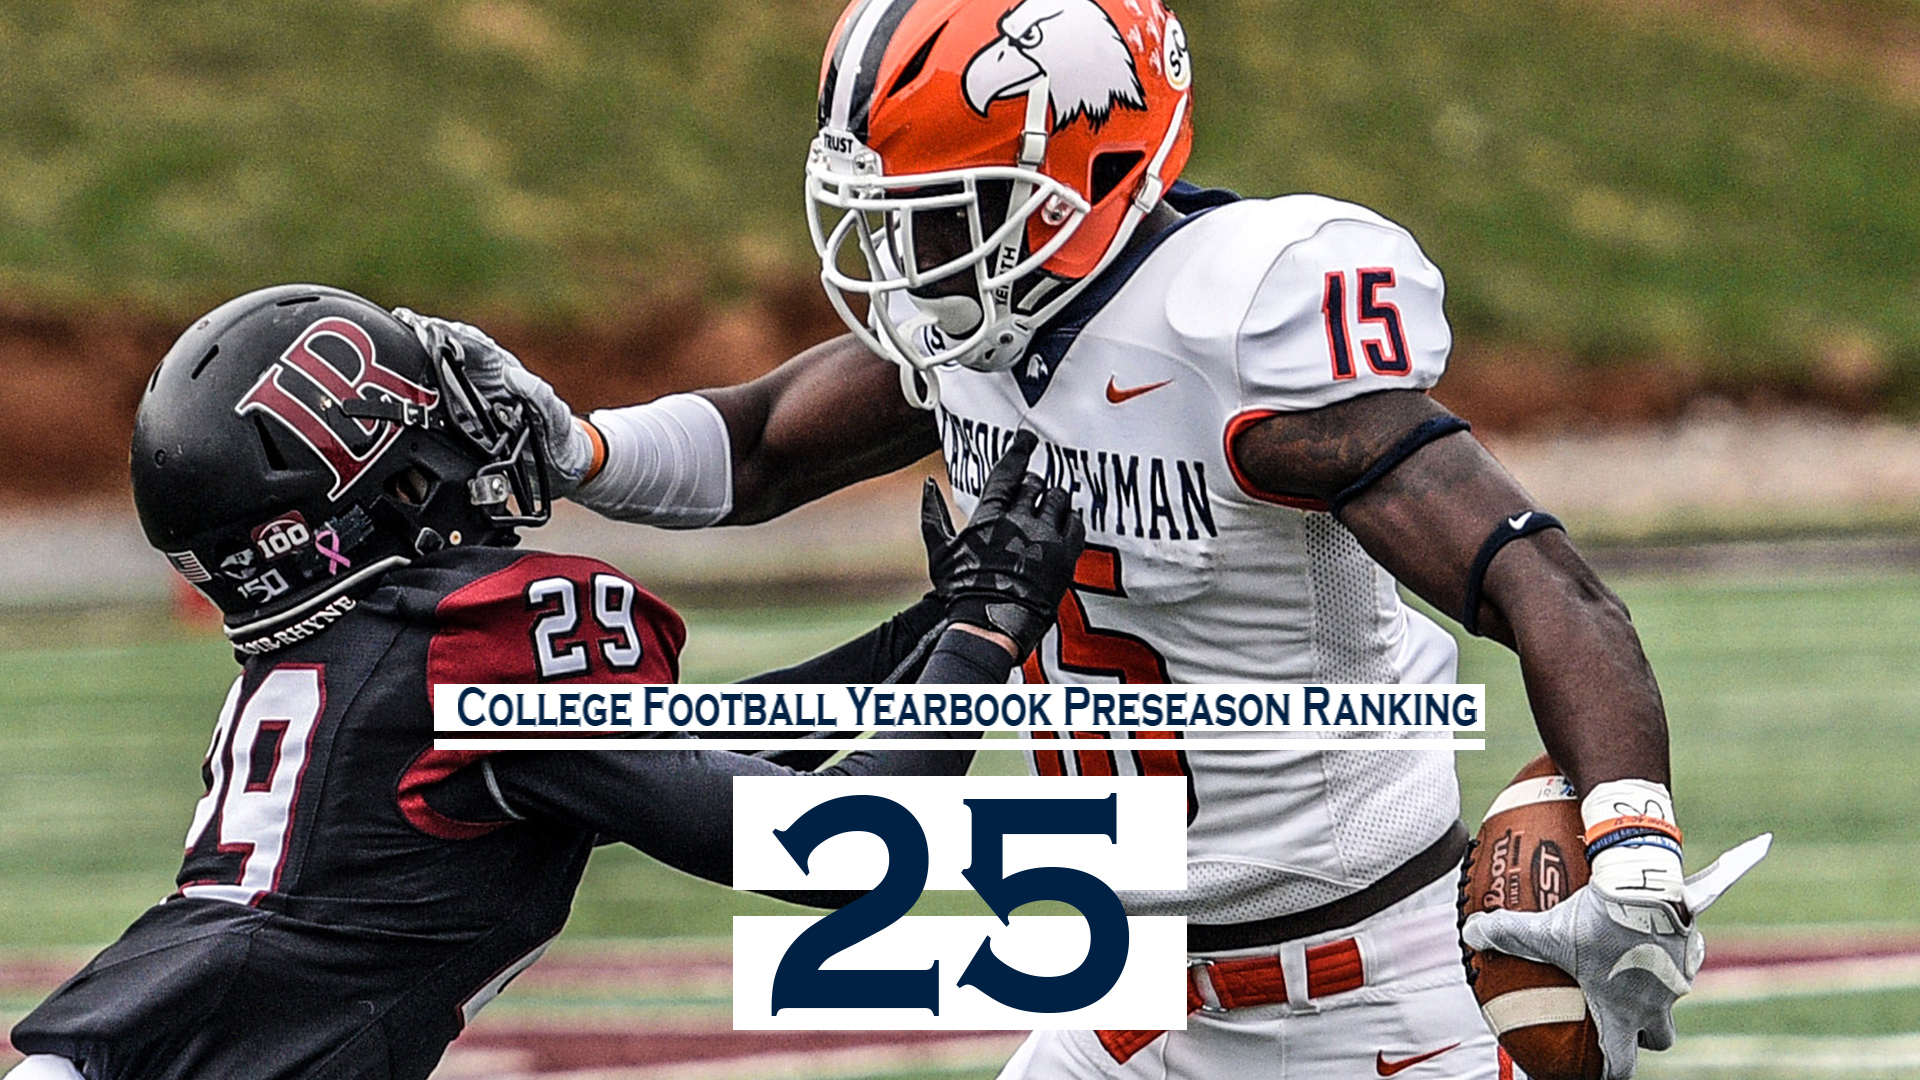 Football nationally ranked in two preseason publications